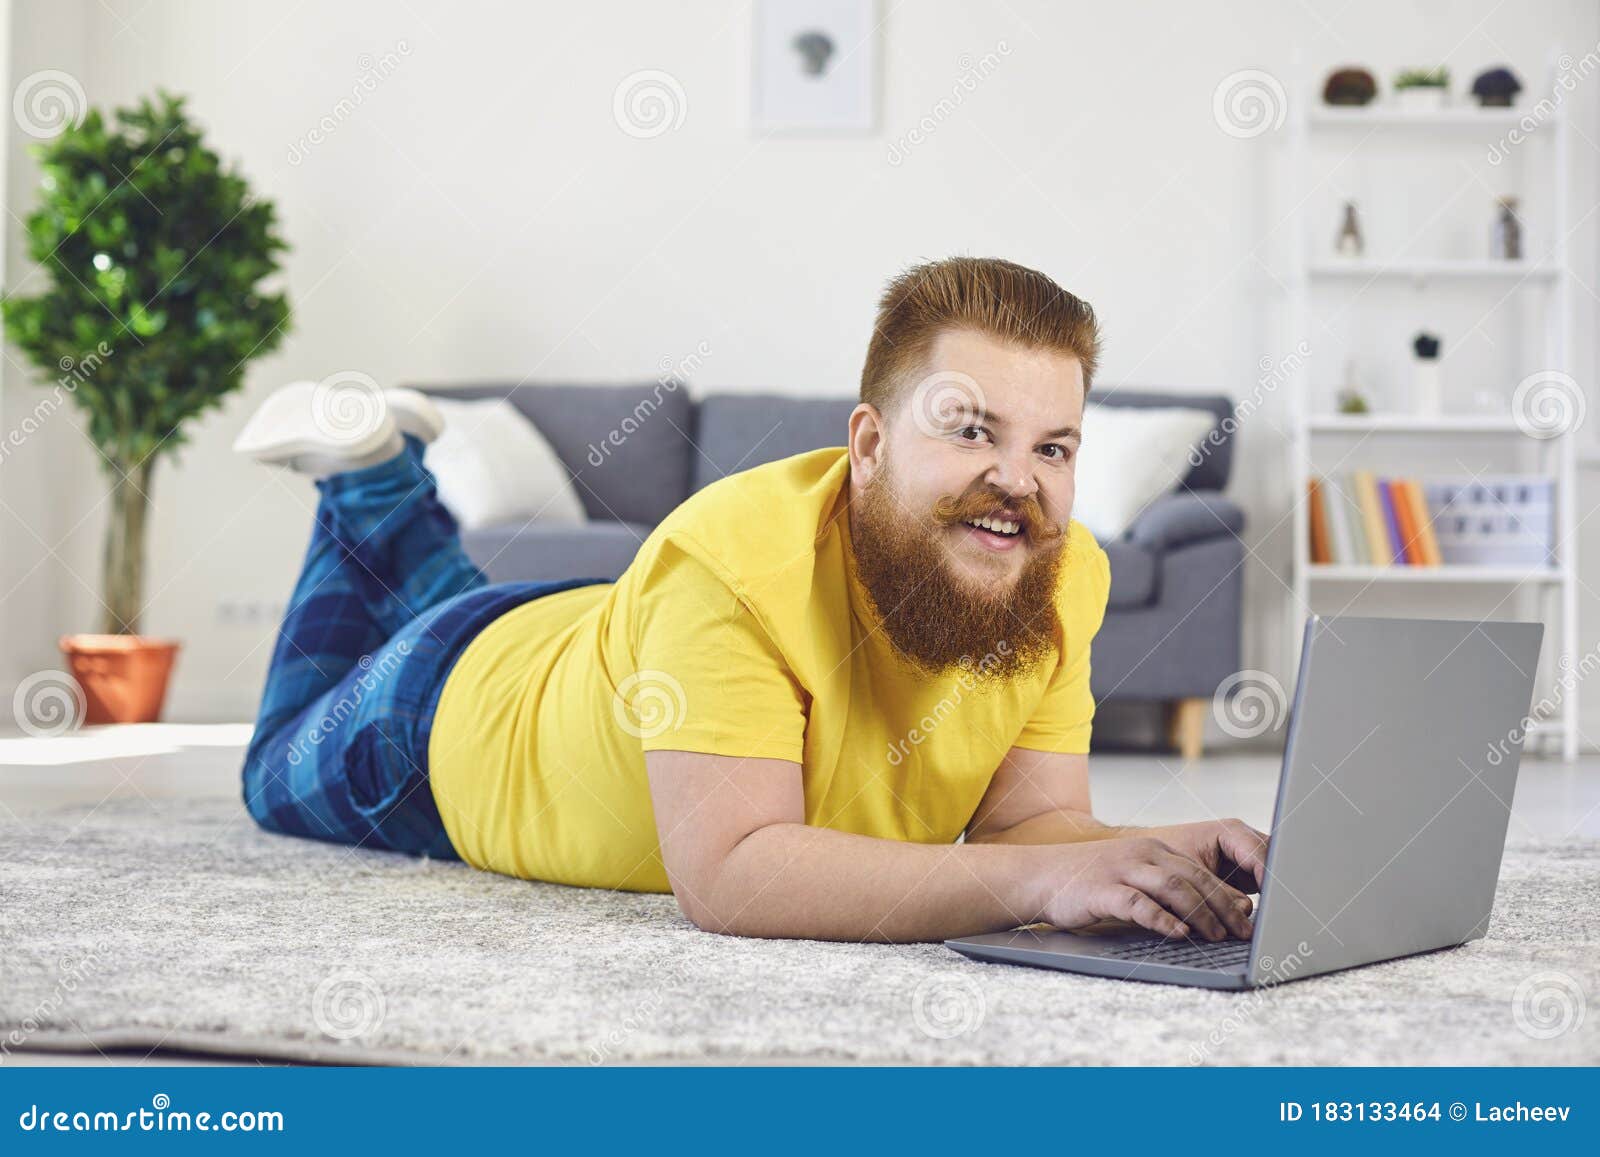 Online Work Job Training . Funny Man with a Beard Working in a ...